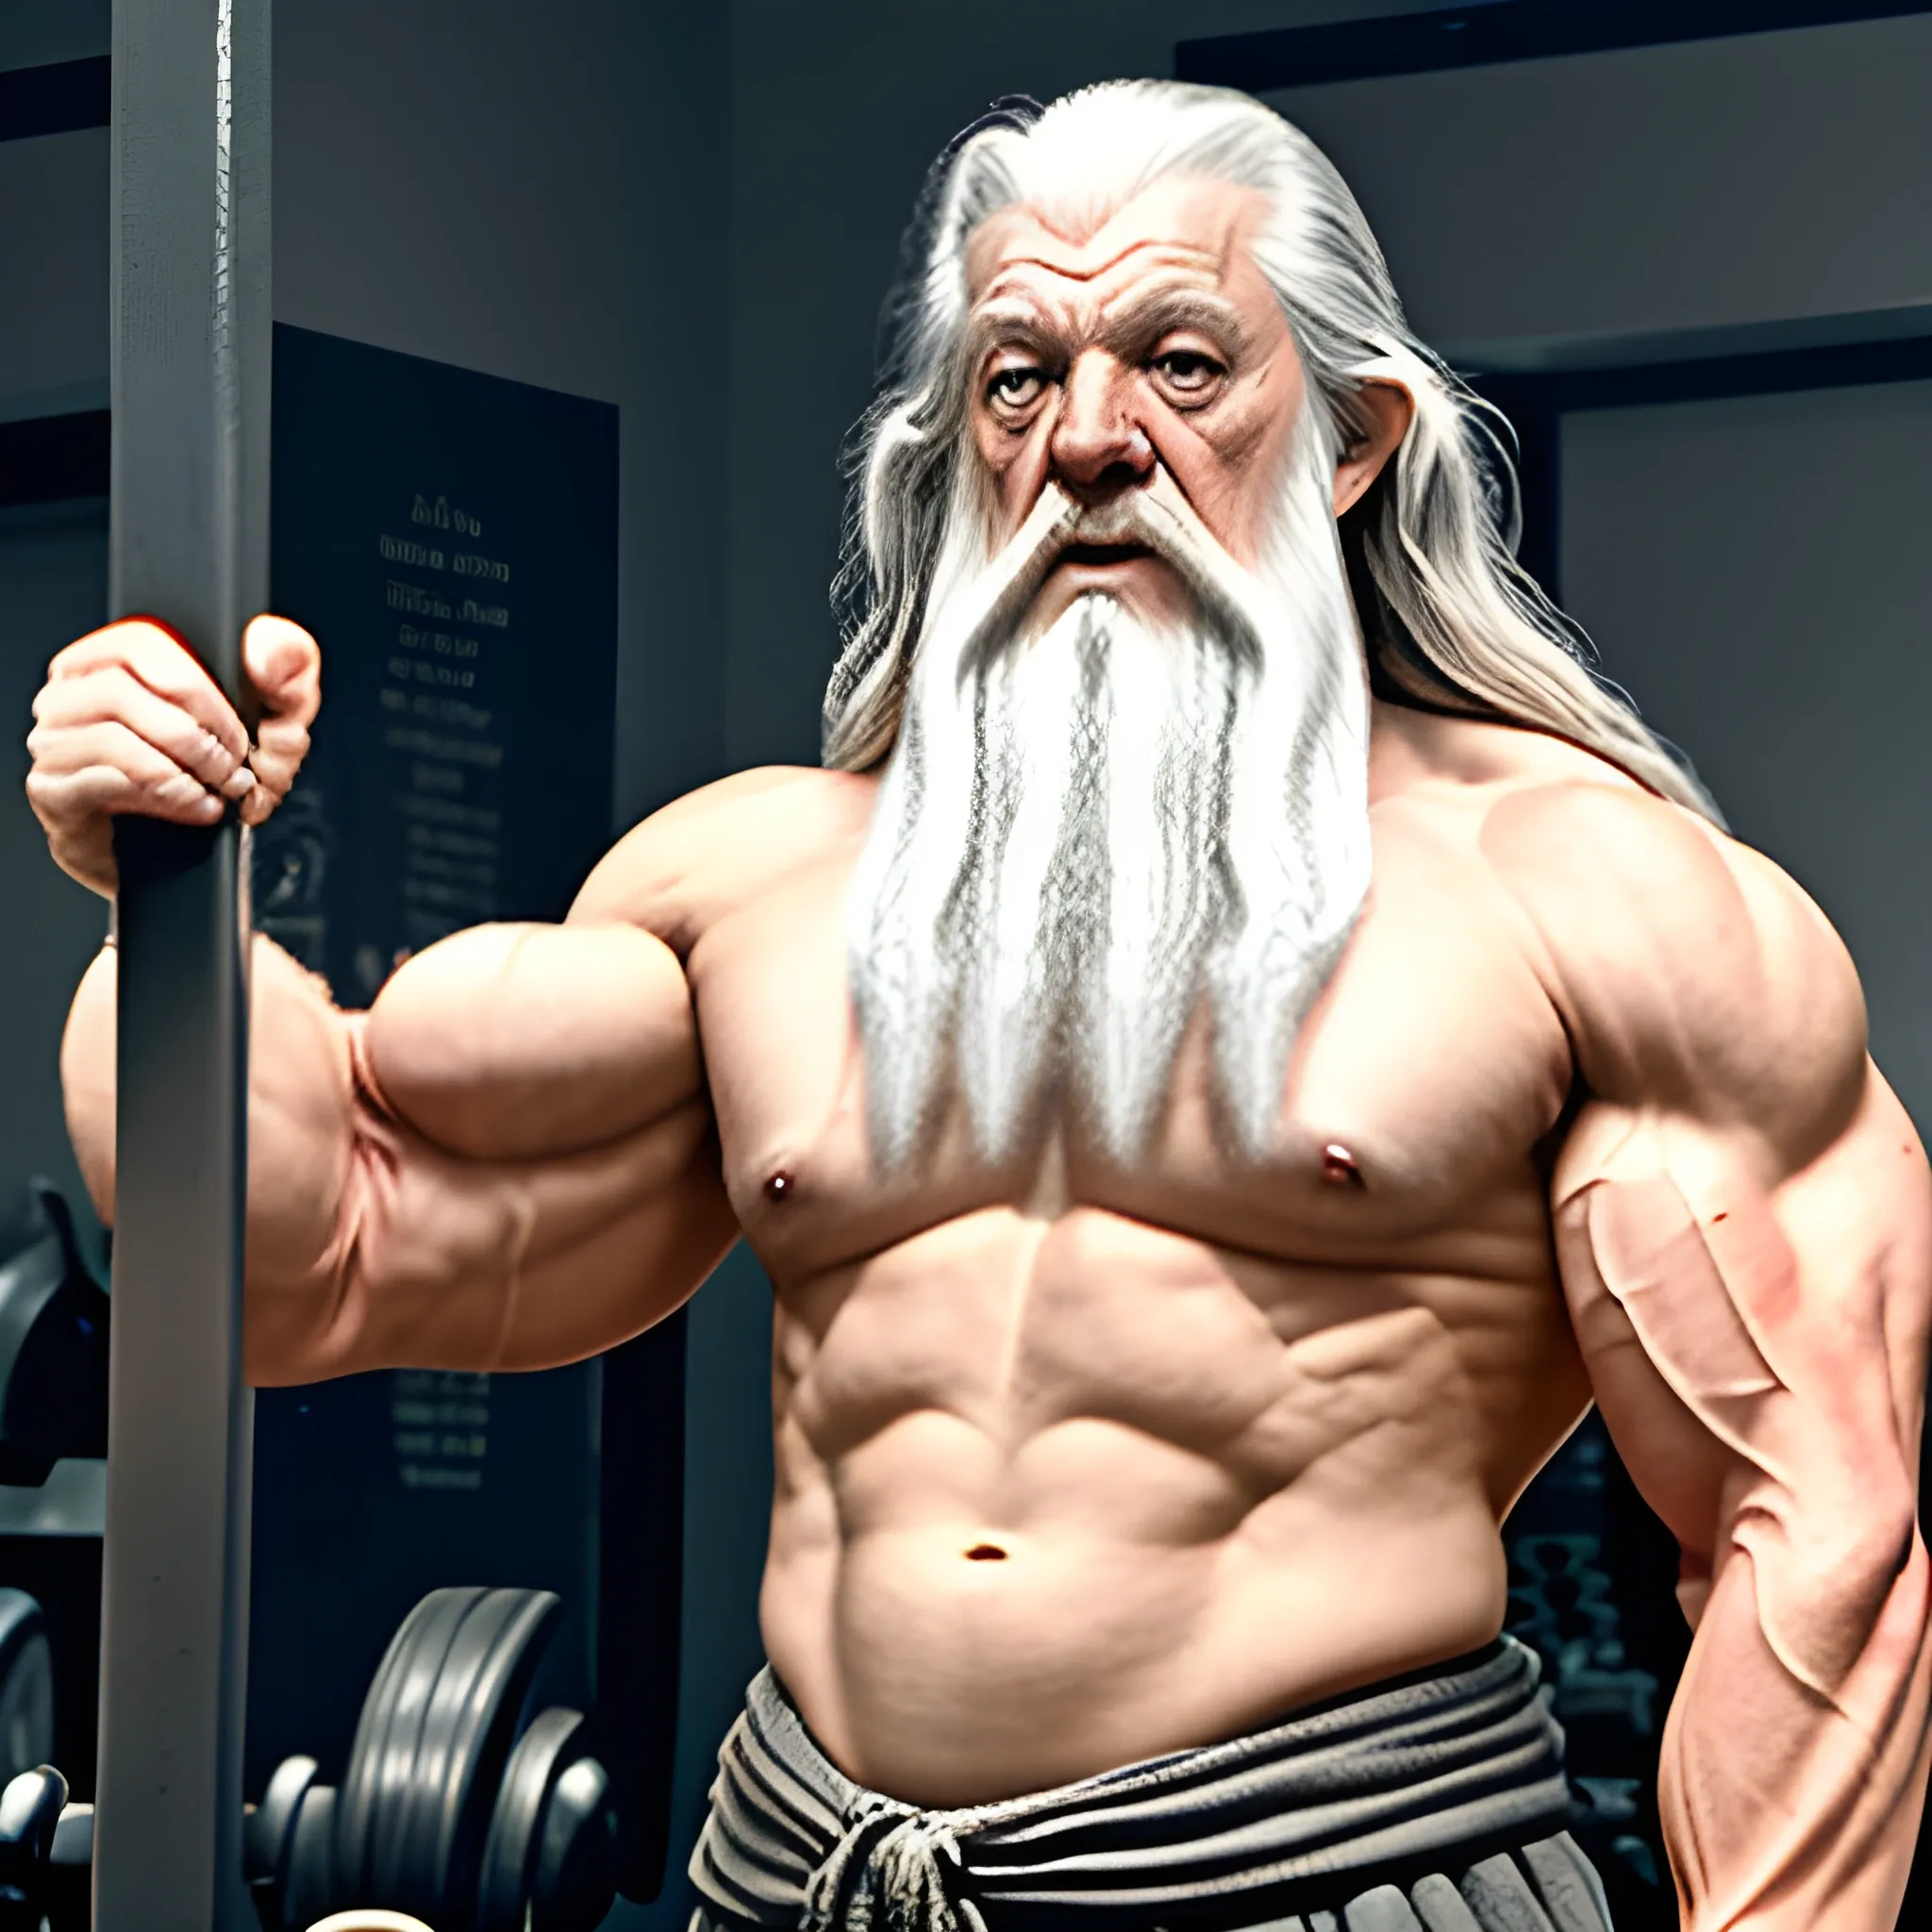 Gandalf, from Lord of the Rings, has gone to the gym and trained very much. He is now big and buff and is flexing very hard.
